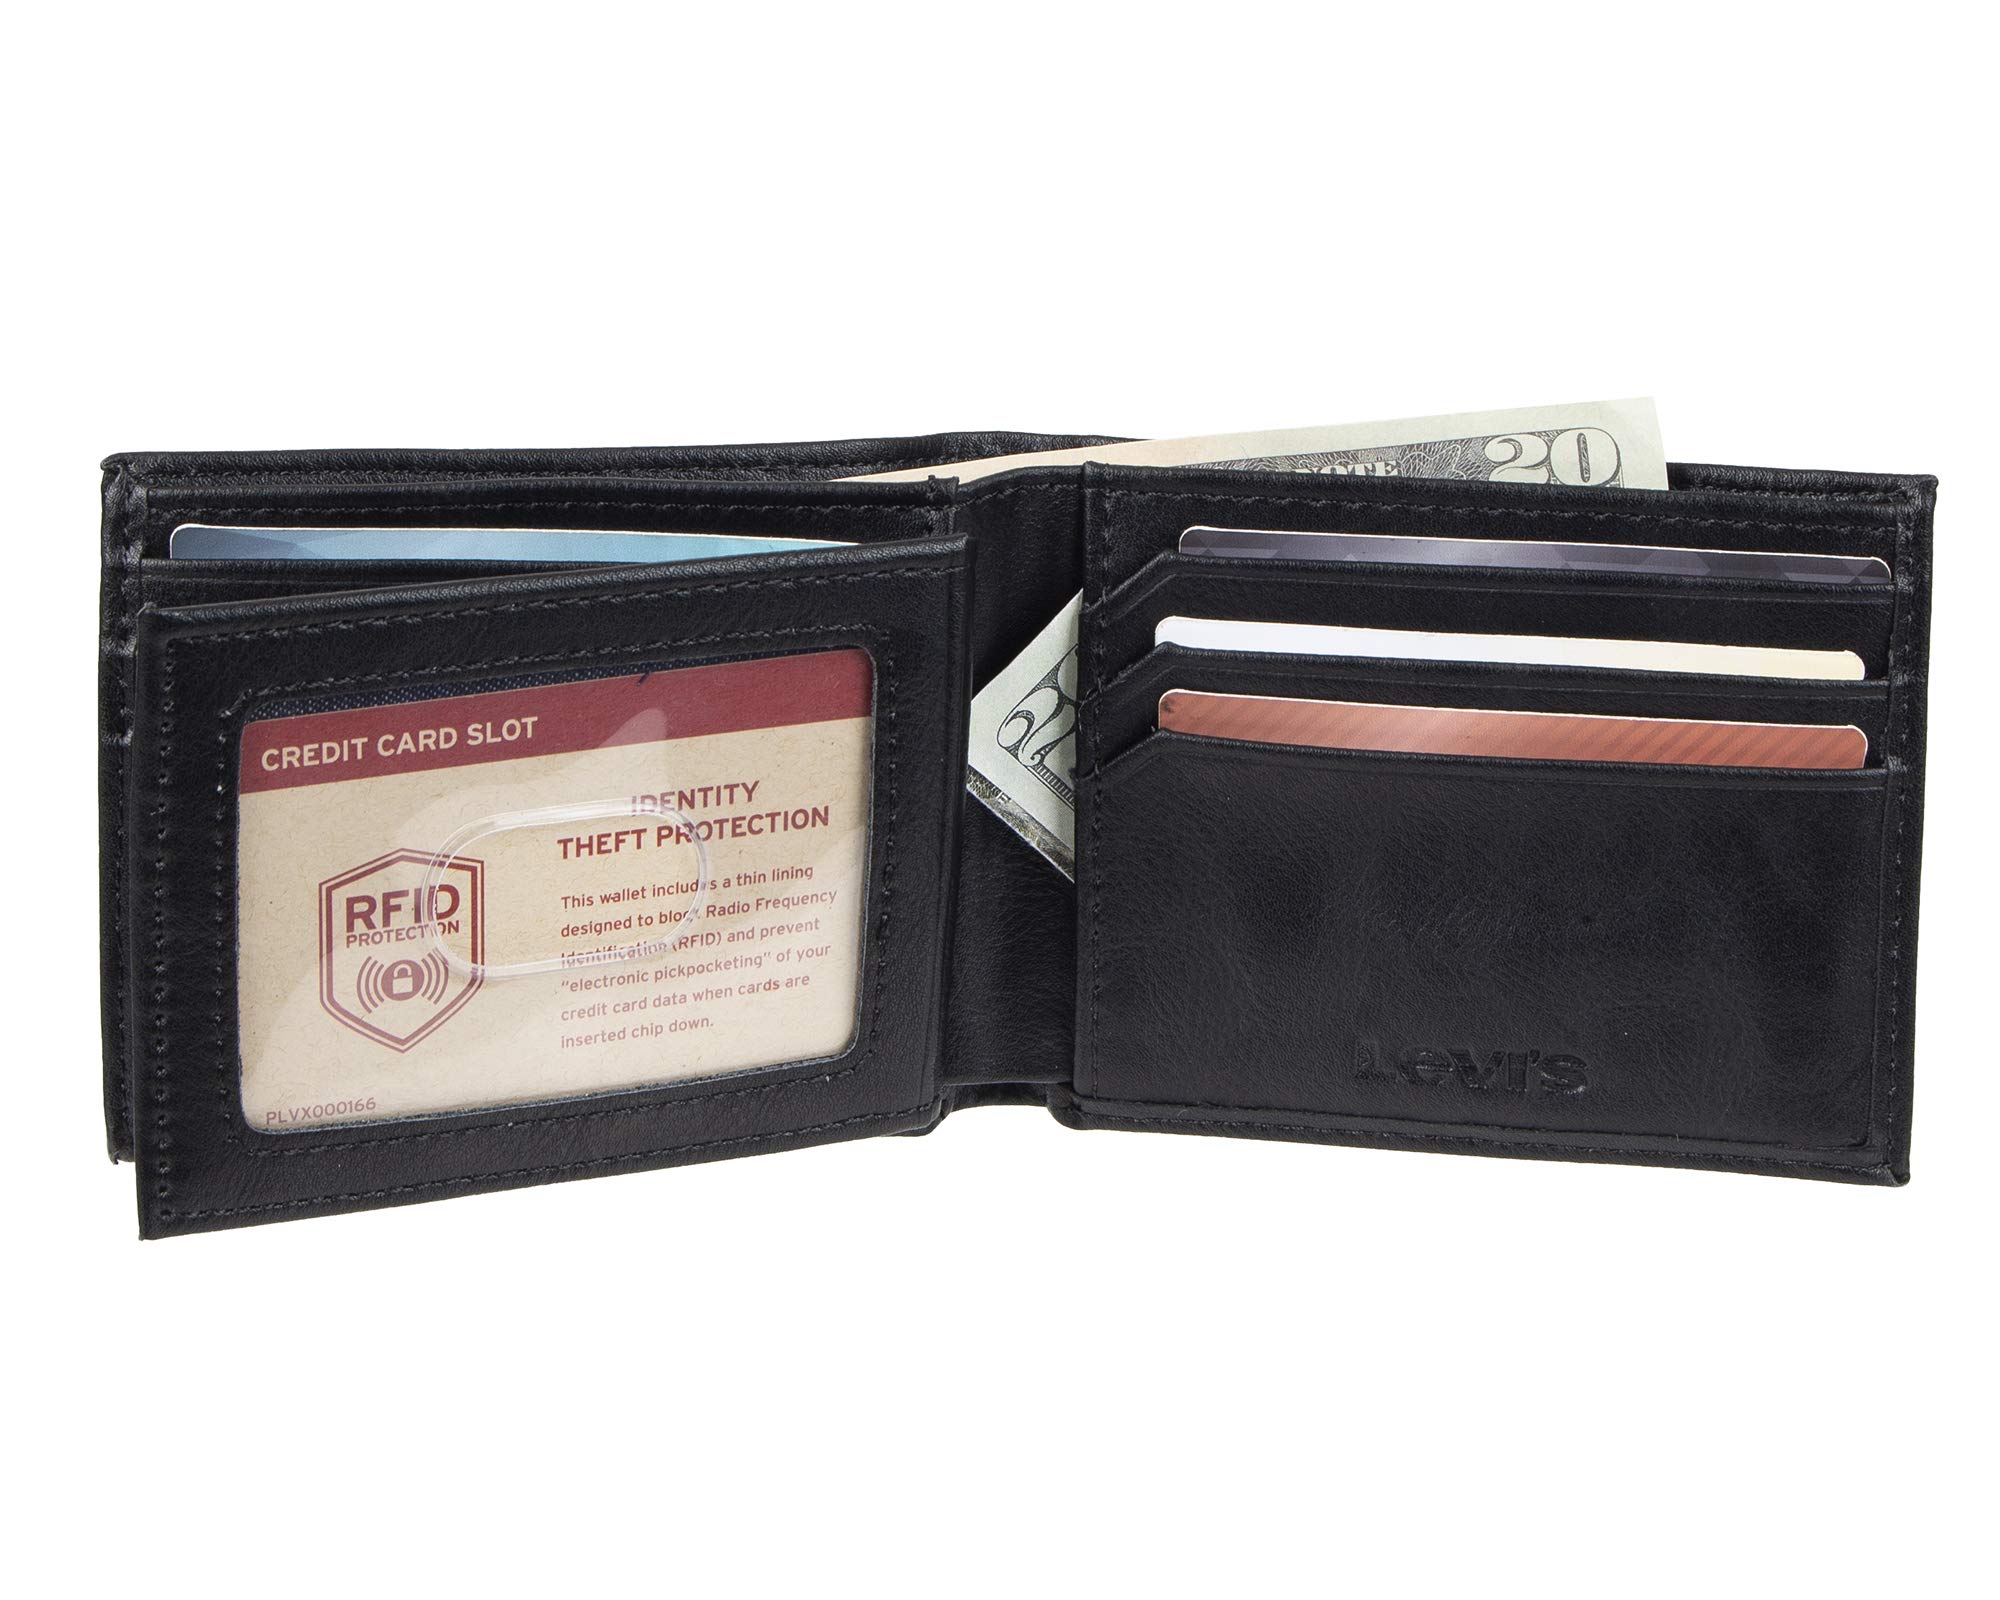 Levi's Men's Extra Capacity Slim Bifold Wallet with Multiple Card Slots